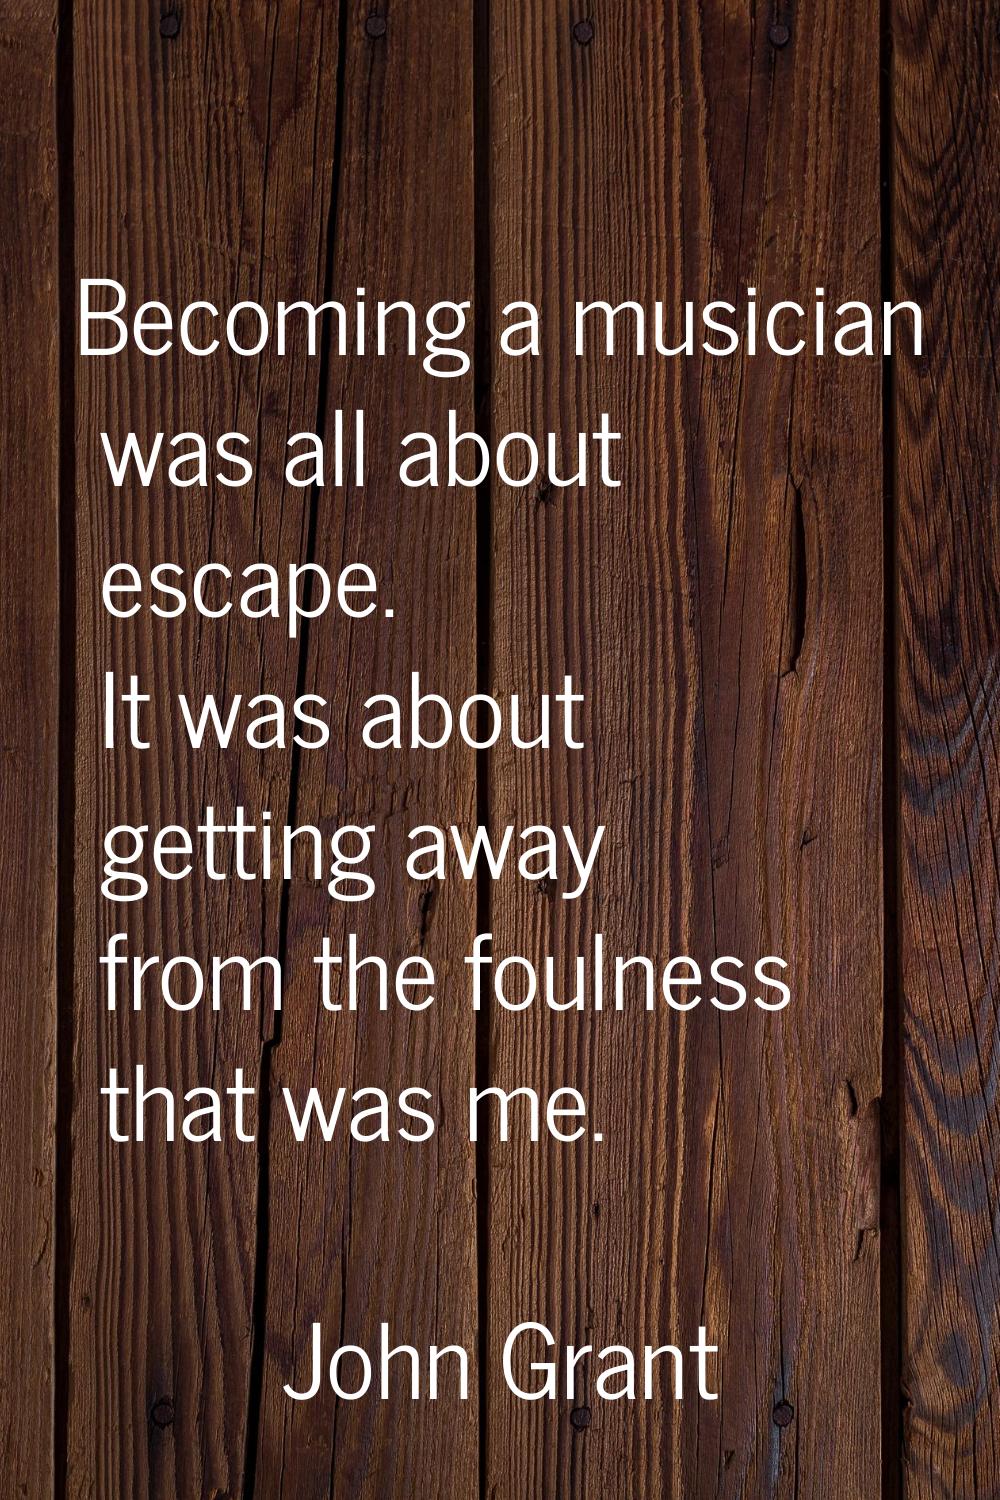 Becoming a musician was all about escape. It was about getting away from the foulness that was me.